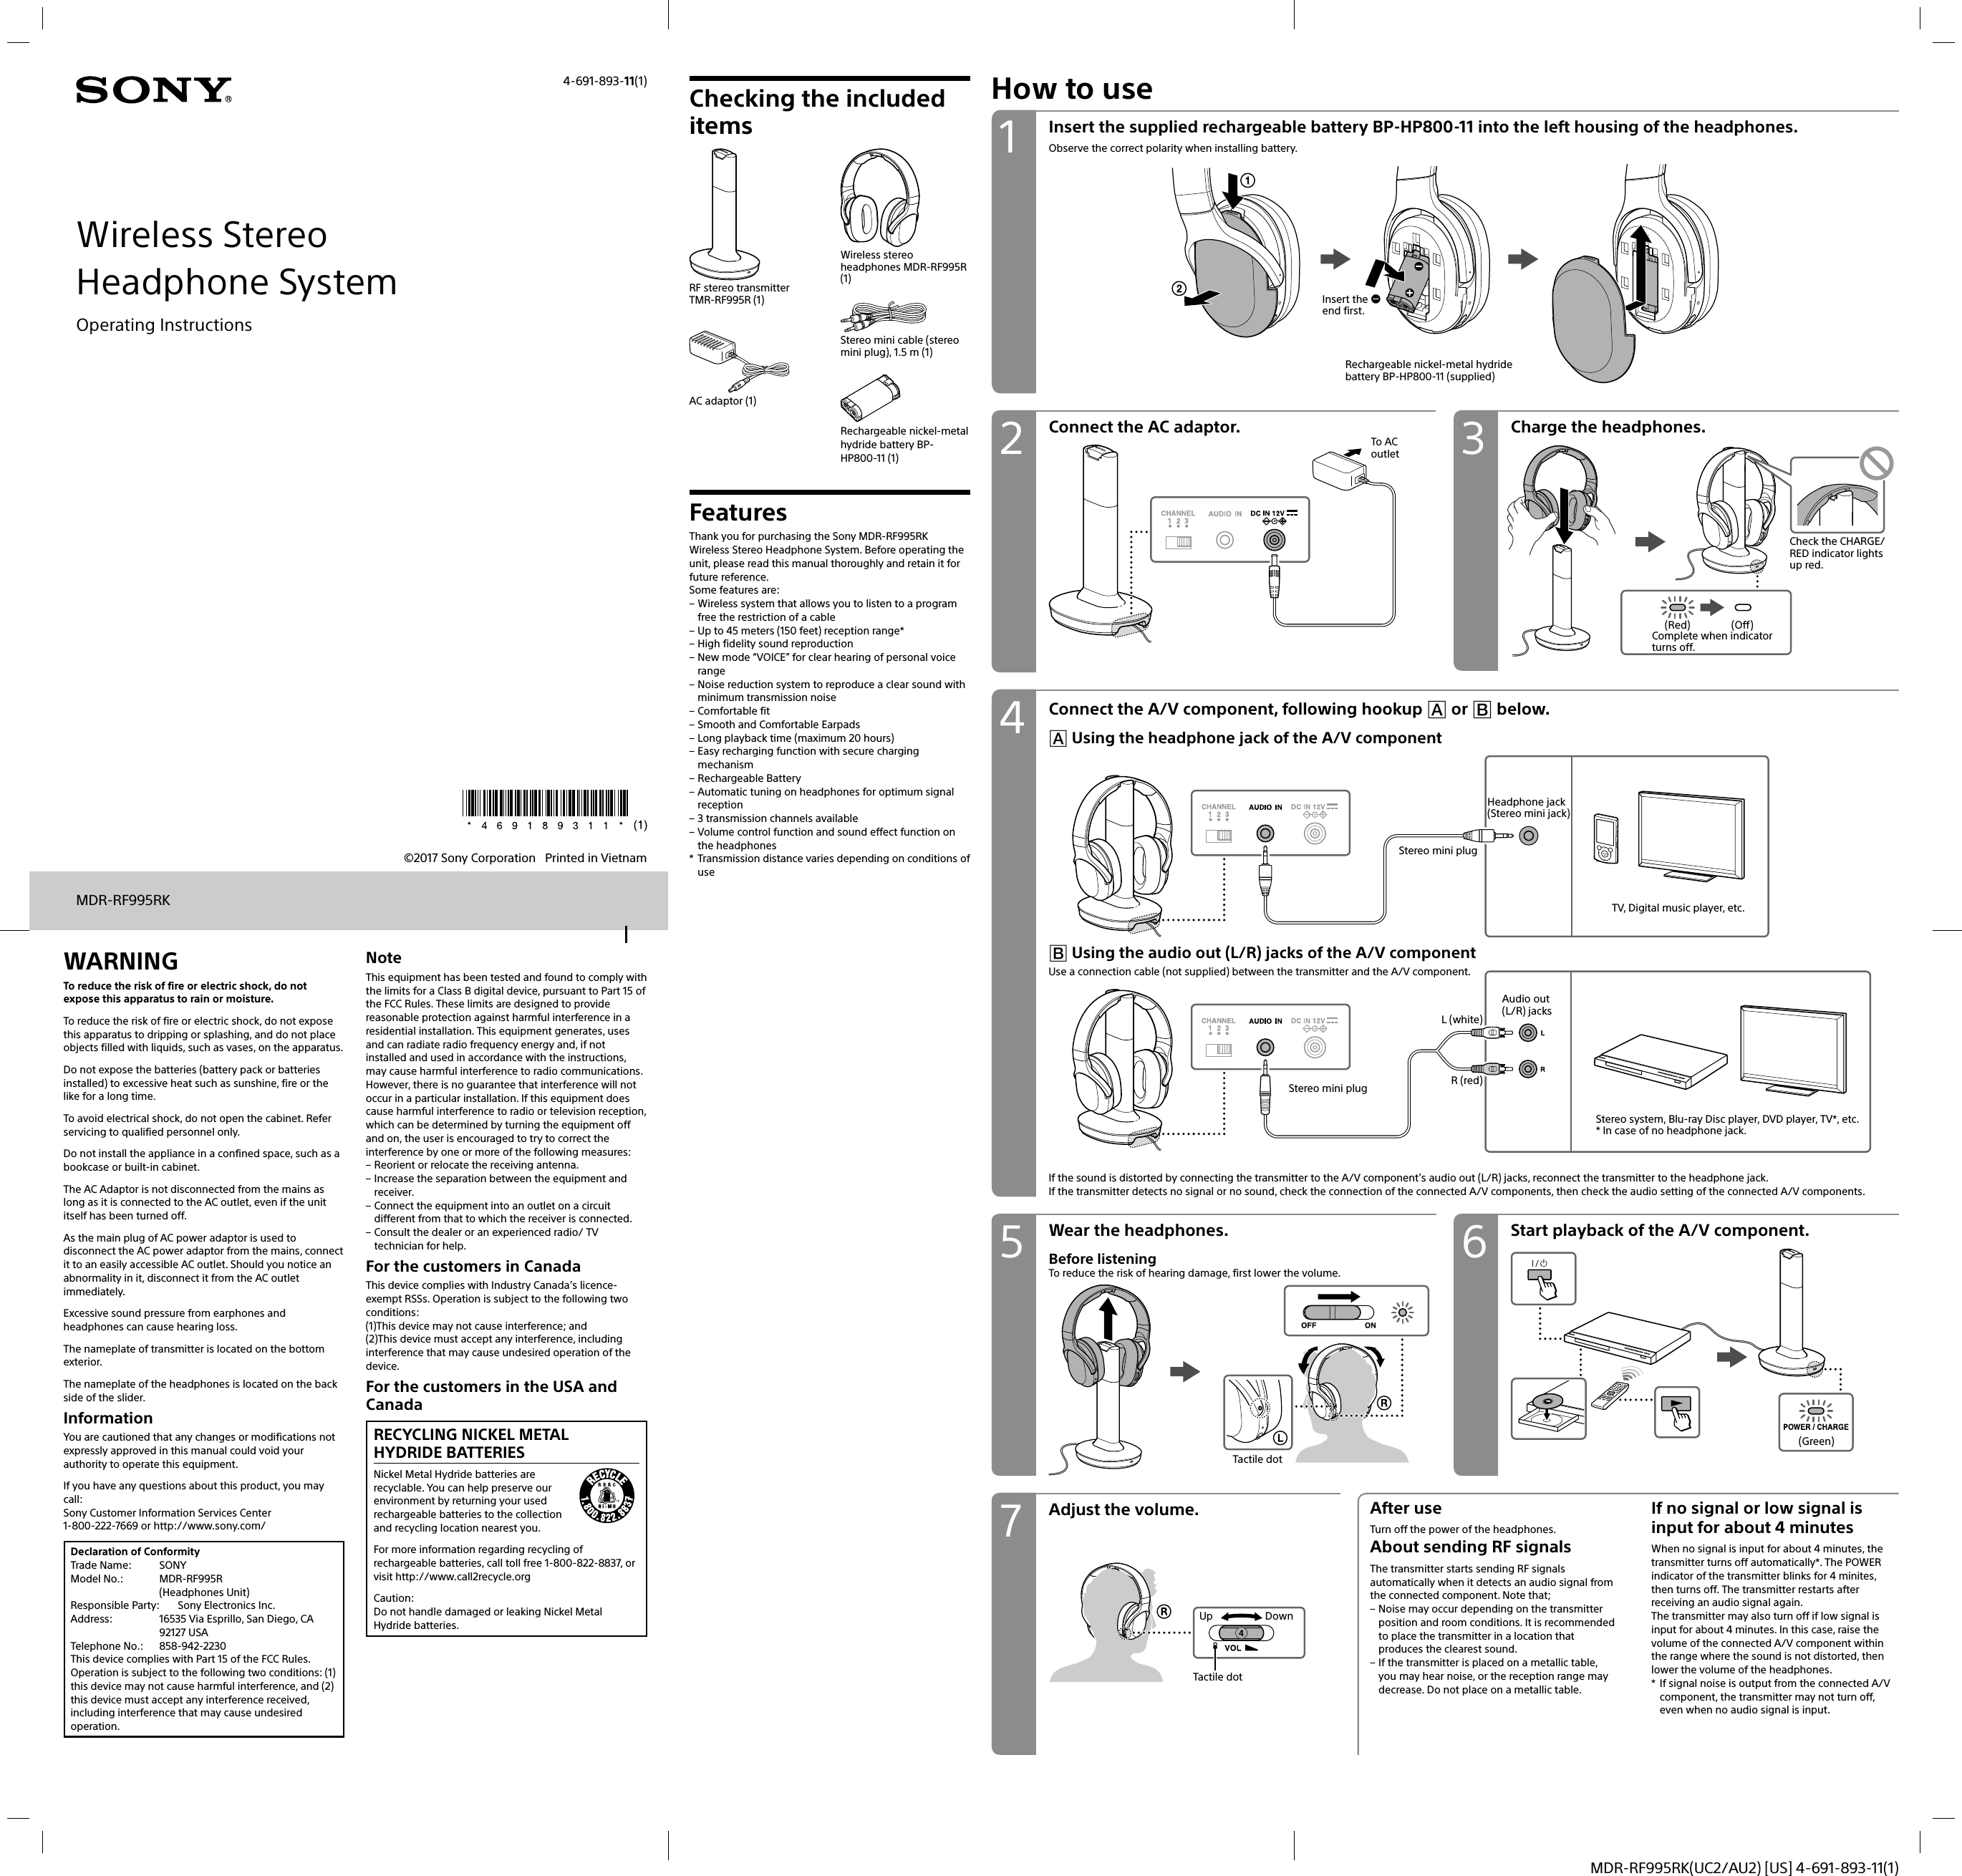 MDR-RF995RK(UC2/AU2) [US] 4-691-893-11(1)Wireless StereoHeadphone System©2017 Sony Corporation   Printed in Vietnam4-691-893-11(1)MDR-RF995RKOperating InstructionsWARNINGTo reduce the risk of fire or electric shock, do not expose this apparatus to rain or moisture.To reduce the risk of fire or electric shock, do not expose this apparatus to dripping or splashing, and do not place objects filled with liquids, such as vases, on the apparatus.Do not expose the batteries (battery pack or batteries installed) to excessive heat such as sunshine, fire or the like for a long time.To avoid electrical shock, do not open the cabinet. Refer servicing to qualified personnel only.Do not install the appliance in a confined space, such as a bookcase or built-in cabinet.The AC Adaptor is not disconnected from the mains as long as it is connected to the AC outlet, even if the unit itself has been turned off.As the main plug of AC power adaptor is used to disconnect the AC power adaptor from the mains, connect it to an easily accessible AC outlet. Should you notice an abnormality in it, disconnect it from the AC outlet immediately.Excessive sound pressure from earphones and headphones can cause hearing loss.The nameplate of transmitter is located on the bottom exterior.The nameplate of the headphones is located on the back side of the slider.InformationYou are cautioned that any changes or modifications not expressly approved in this manual could void your authority to operate this equipment.If you have any questions about this product, you may call:Sony Customer Information Services Center1-800-222-7669 or http://www.sony.com/Declaration of ConformityTrade Name:  SONYModel No.:  MDR-RF995R (Headphones Unit)Responsible Party:  Sony Electronics Inc.Address:  16535 Via Esprillo, San Diego, CA 92127 USATelephone No.:  858-942-2230This device complies with Part 15 of the FCC Rules. Operation is subject to the following two conditions: (1) this device may not cause harmful interference, and (2) this device must accept any interference received, including interference that may cause undesired operation.NoteThis equipment has been tested and found to comply with the limits for a Class B digital device, pursuant to Part 15 of the FCC Rules. These limits are designed to provide reasonable protection against harmful interference in a residential installation. This equipment generates, uses and can radiate radio frequency energy and, if not installed and used in accordance with the instructions, may cause harmful interference to radio communications.However, there is no guarantee that interference will not occur in a particular installation. If this equipment does cause harmful interference to radio or television reception, which can be determined by turning the equipment off and on, the user is encouraged to try to correct the interference by one or more of the following measures: – Reorient or relocate the receiving antenna. – Increase the separation between the equipment and receiver. – Connect the equipment into an outlet on a circuit different from that to which the receiver is connected. – Consult the dealer or an experienced radio/ TV technician for help.For the customers in CanadaThis device complies with Industry Canada’s licence-exempt RSSs. Operation is subject to the following two conditions:(1)This device may not cause interference; and(2)This device must accept any interference, including interference that may cause undesired operation of the device.For the customers in the USA and CanadaRECYCLING NICKEL METAL HYDRIDE BATTERIESNickel Metal Hydride batteries are recyclable. You can help preserve our environment by returning your used rechargeable batteries to the collection and recycling location nearest you.For more information regarding recycling of rechargeable batteries, call toll free 1-800-822-8837, or visit http://www.call2recycle.orgCaution:Do not handle damaged or leaking Nickel Metal Hydride batteries.How to useConnect the AC adaptor. Charge the headphones.To AC outlet(Red) (Off)Complete when indicator turns off.Check the CHARGE/RED indicator lights up red.Connect the A/V component, following hookup  or  below. Using the headphone jack of the A/V componentStereo mini plugHeadphone jack (Stereo mini jack)TV, Digital music player, etc.L (white)R (red)Stereo mini plugAudio out (L/R) jacksStereo system, Blu-ray Disc player, DVD player, TV*, etc.* In case of no headphone jack.Adjust the volume. After useTurn off the power of the headphones.About sending RF signalsThe transmitter starts sending RF signals automatically when it detects an audio signal from the connected component. Note that; – Noise may occur depending on the transmitter position and room conditions. It is recommended to place the transmitter in a location that produces the clearest sound. – If the transmitter is placed on a metallic table, you may hear noise, or the reception range may decrease. Do not place on a metallic table.If no signal or low signal is input for about 4 minutesWhen no signal is input for about 4 minutes, the transmitter turns off automatically*. The POWER indicator of the transmitter blinks for 4 minites, then turns off. The transmitter restarts after receiving an audio signal again.The transmitter may also turn off if low signal is input for about 4 minutes. In this case, raise the volume of the connected A/V component within the range where the sound is not distorted, then lower the volume of the headphones.*  If signal noise is output from the connected A/V component, the transmitter may not turn off, even when no audio signal is input.Start playback of the A/V component.Wear the headphones.Before listeningTo reduce the risk of hearing damage, first lower the volume.Tactile dotUp DownTactile dot Using the audio out (L/R) jacks of the A/V componentUse a connection cable (not supplied) between the transmitter and the A/V component.If the sound is distorted by connecting the transmitter to the A/V component’s audio out (L/R) jacks, reconnect the transmitter to the headphone jack.If the transmitter detects no signal or no sound, check the connection of the connected A/V components, then check the audio setting of the connected A/V components.Insert the supplied rechargeable battery BP-HP800-11 into the left housing of the headphones.Observe the correct polarity when installing battery.Rechargeable nickel-metal hydride battery BP-HP800-11 (supplied)Insert the  end first.Checking the included itemsRF stereo transmitter TMR-RF995R (1)AC adaptor (1)Wireless stereo headphones MDR-RF995R (1)Stereo mini cable (stereo mini plug), 1.5 m (1)Rechargeable nickel-metal hydride battery BP-HP800-11 (1)FeaturesThank you for purchasing the Sony MDR-RF995RK Wireless Stereo Headphone System. Before operating the unit, please read this manual thoroughly and retain it for future reference.Some features are: – Wireless system that allows you to listen to a program free the restriction of a cable – Up to 45 meters (150 feet) reception range* – High fidelity sound reproduction – New mode “VOICE” for clear hearing of personal voice range – Noise reduction system to reproduce a clear sound with minimum transmission noise – Comfortable fit – Smooth and Comfortable Earpads – Long playback time (maximum 20 hours) – Easy recharging function with secure charging mechanism – Rechargeable Battery – Automatic tuning on headphones for optimum signal reception – 3 transmission channels available – Volume control function and sound effect function on the headphones*  Transmission distance varies depending on conditions of use(Green)42 375 61